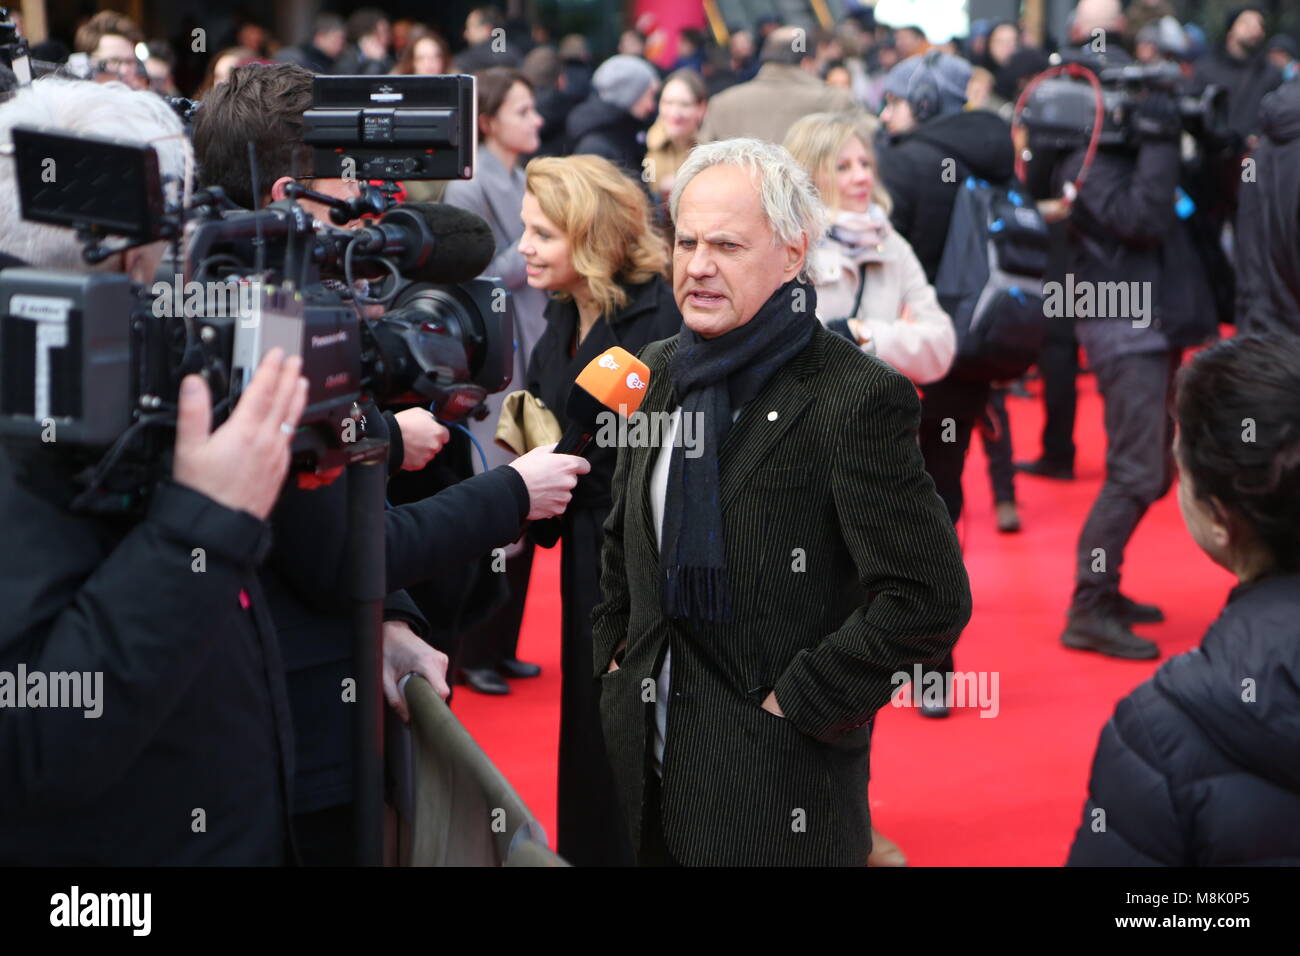 Berlin, Germany. 18th Mar, 2018. Berlin: The world premiere of 'Jim Knopf and Luke the locomotive driver' in front of the Sony Center on Potsdamer Platz. The photo shows the actor on the red carpet. Credit: Simone Kuhlmey/Pacific Press/Alamy Live News Stock Photo